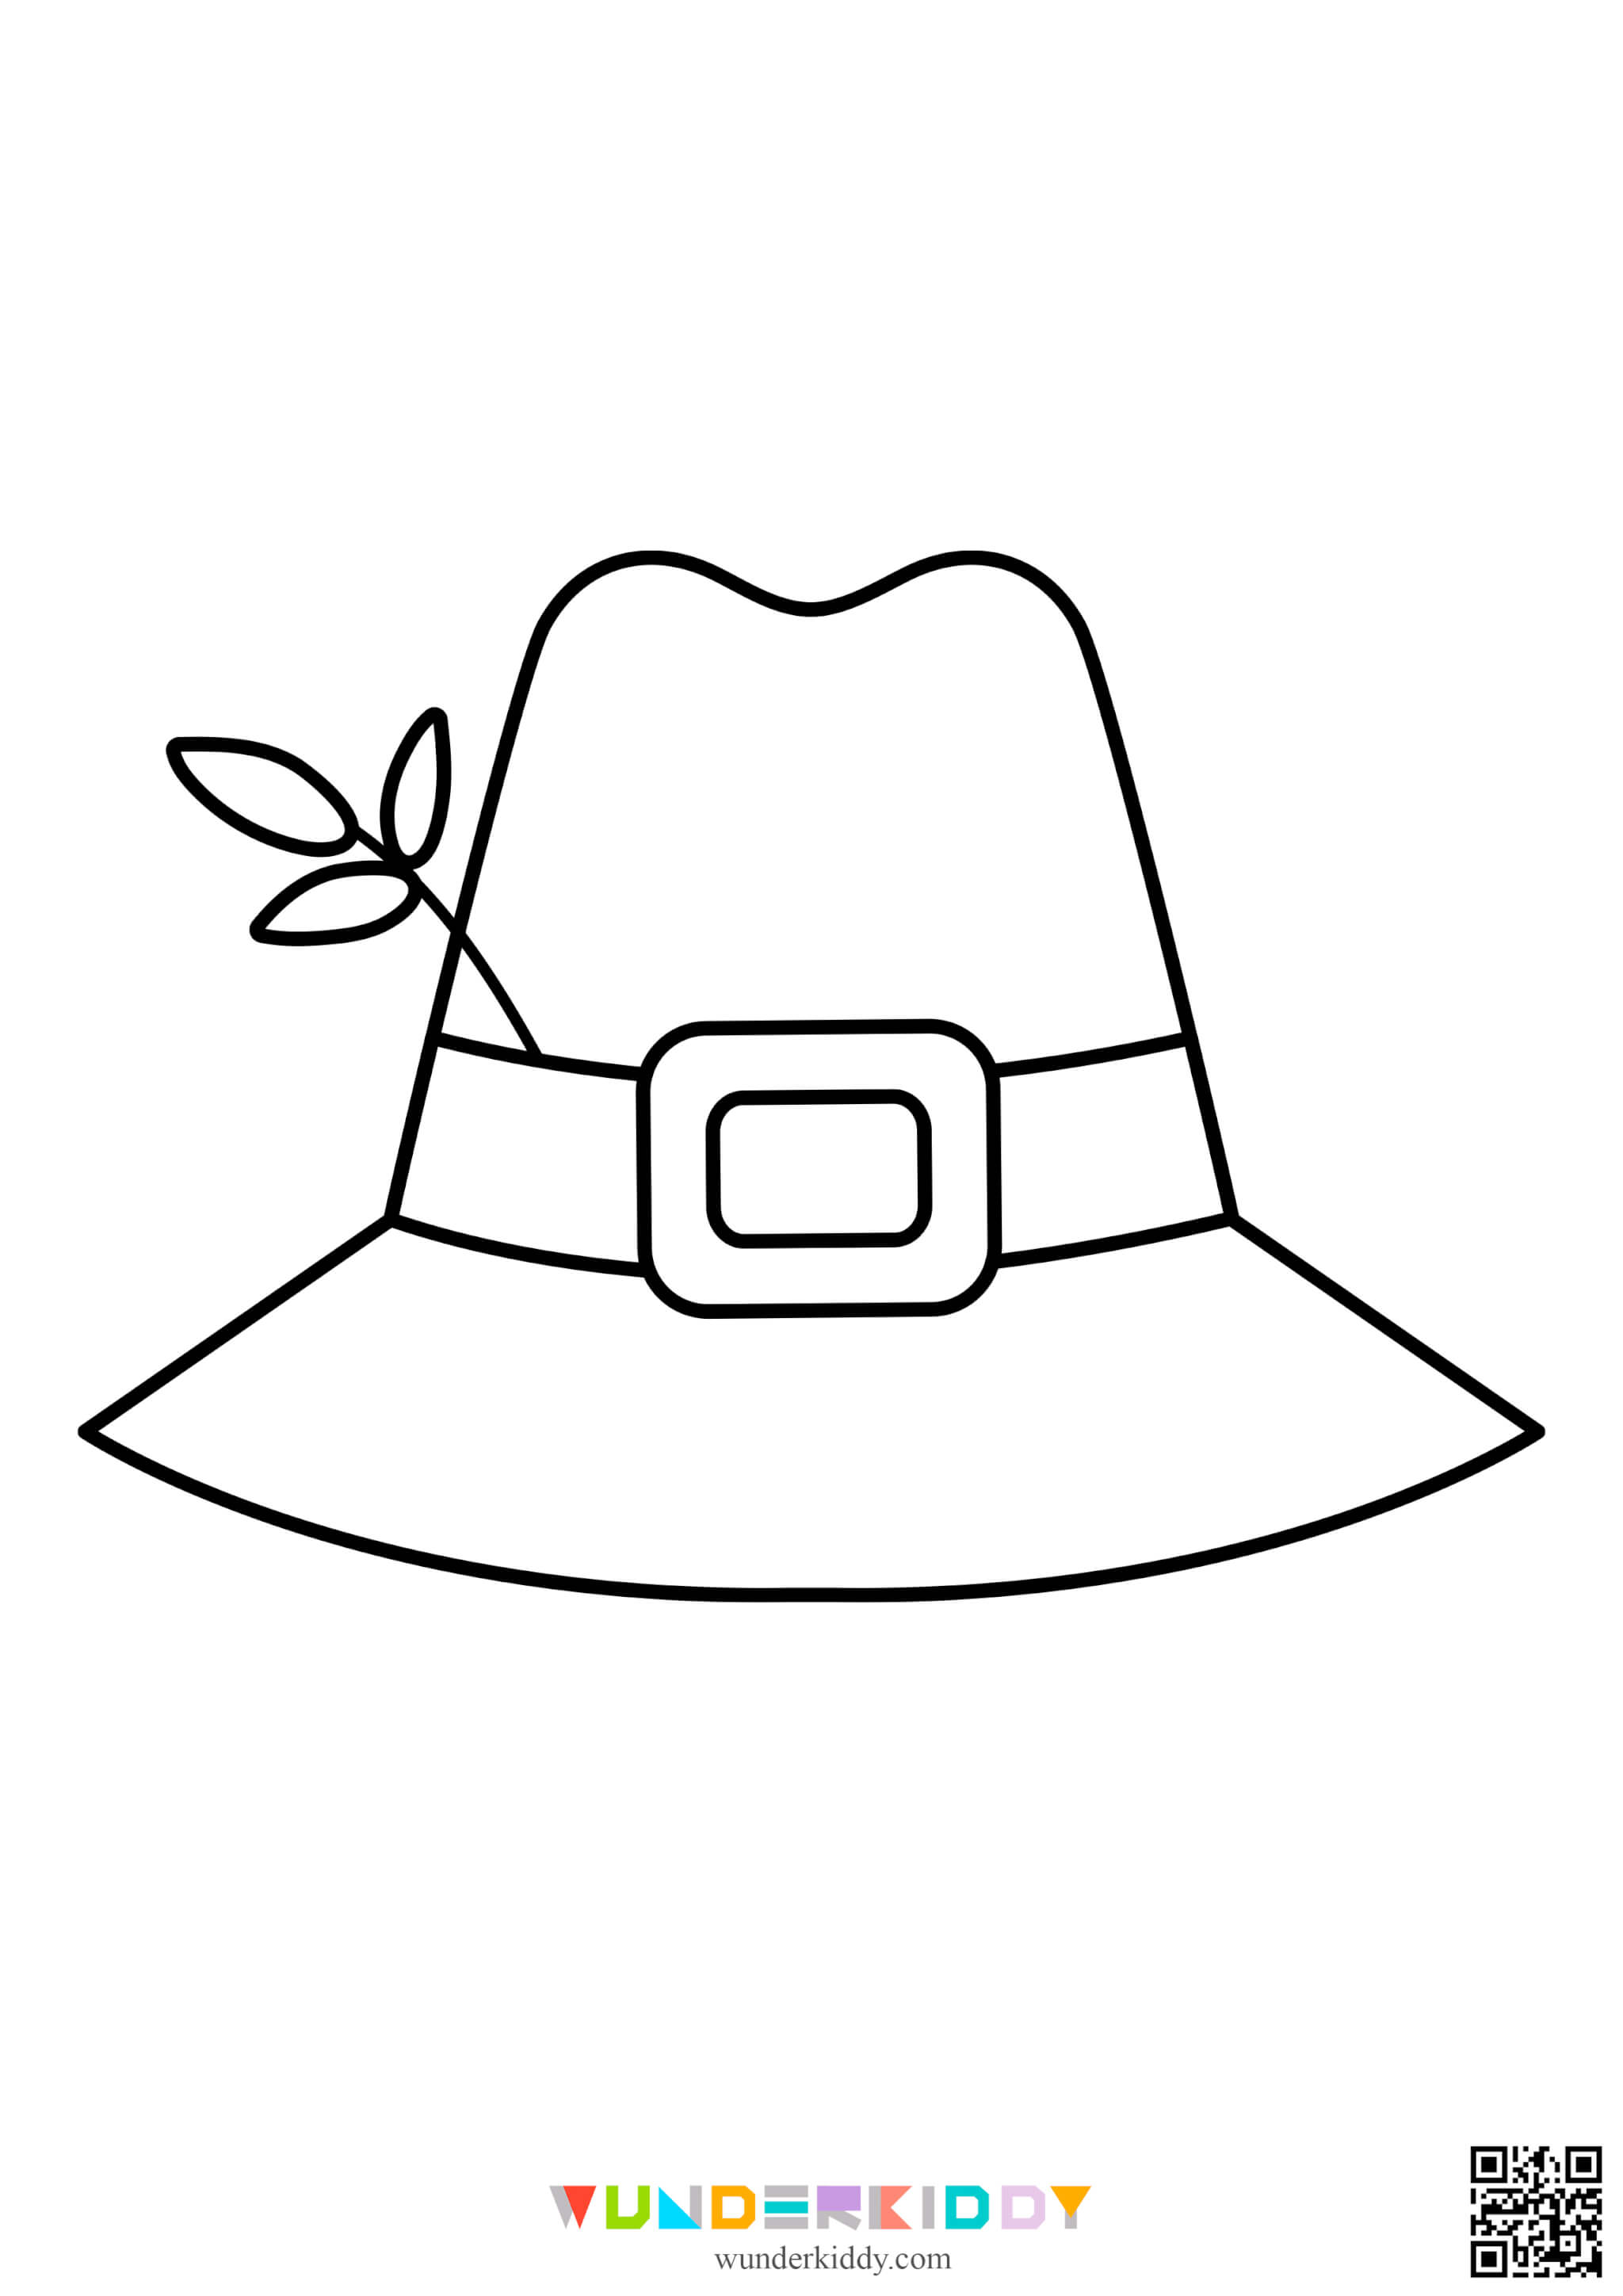 Fall Coloring Pages - Image 8